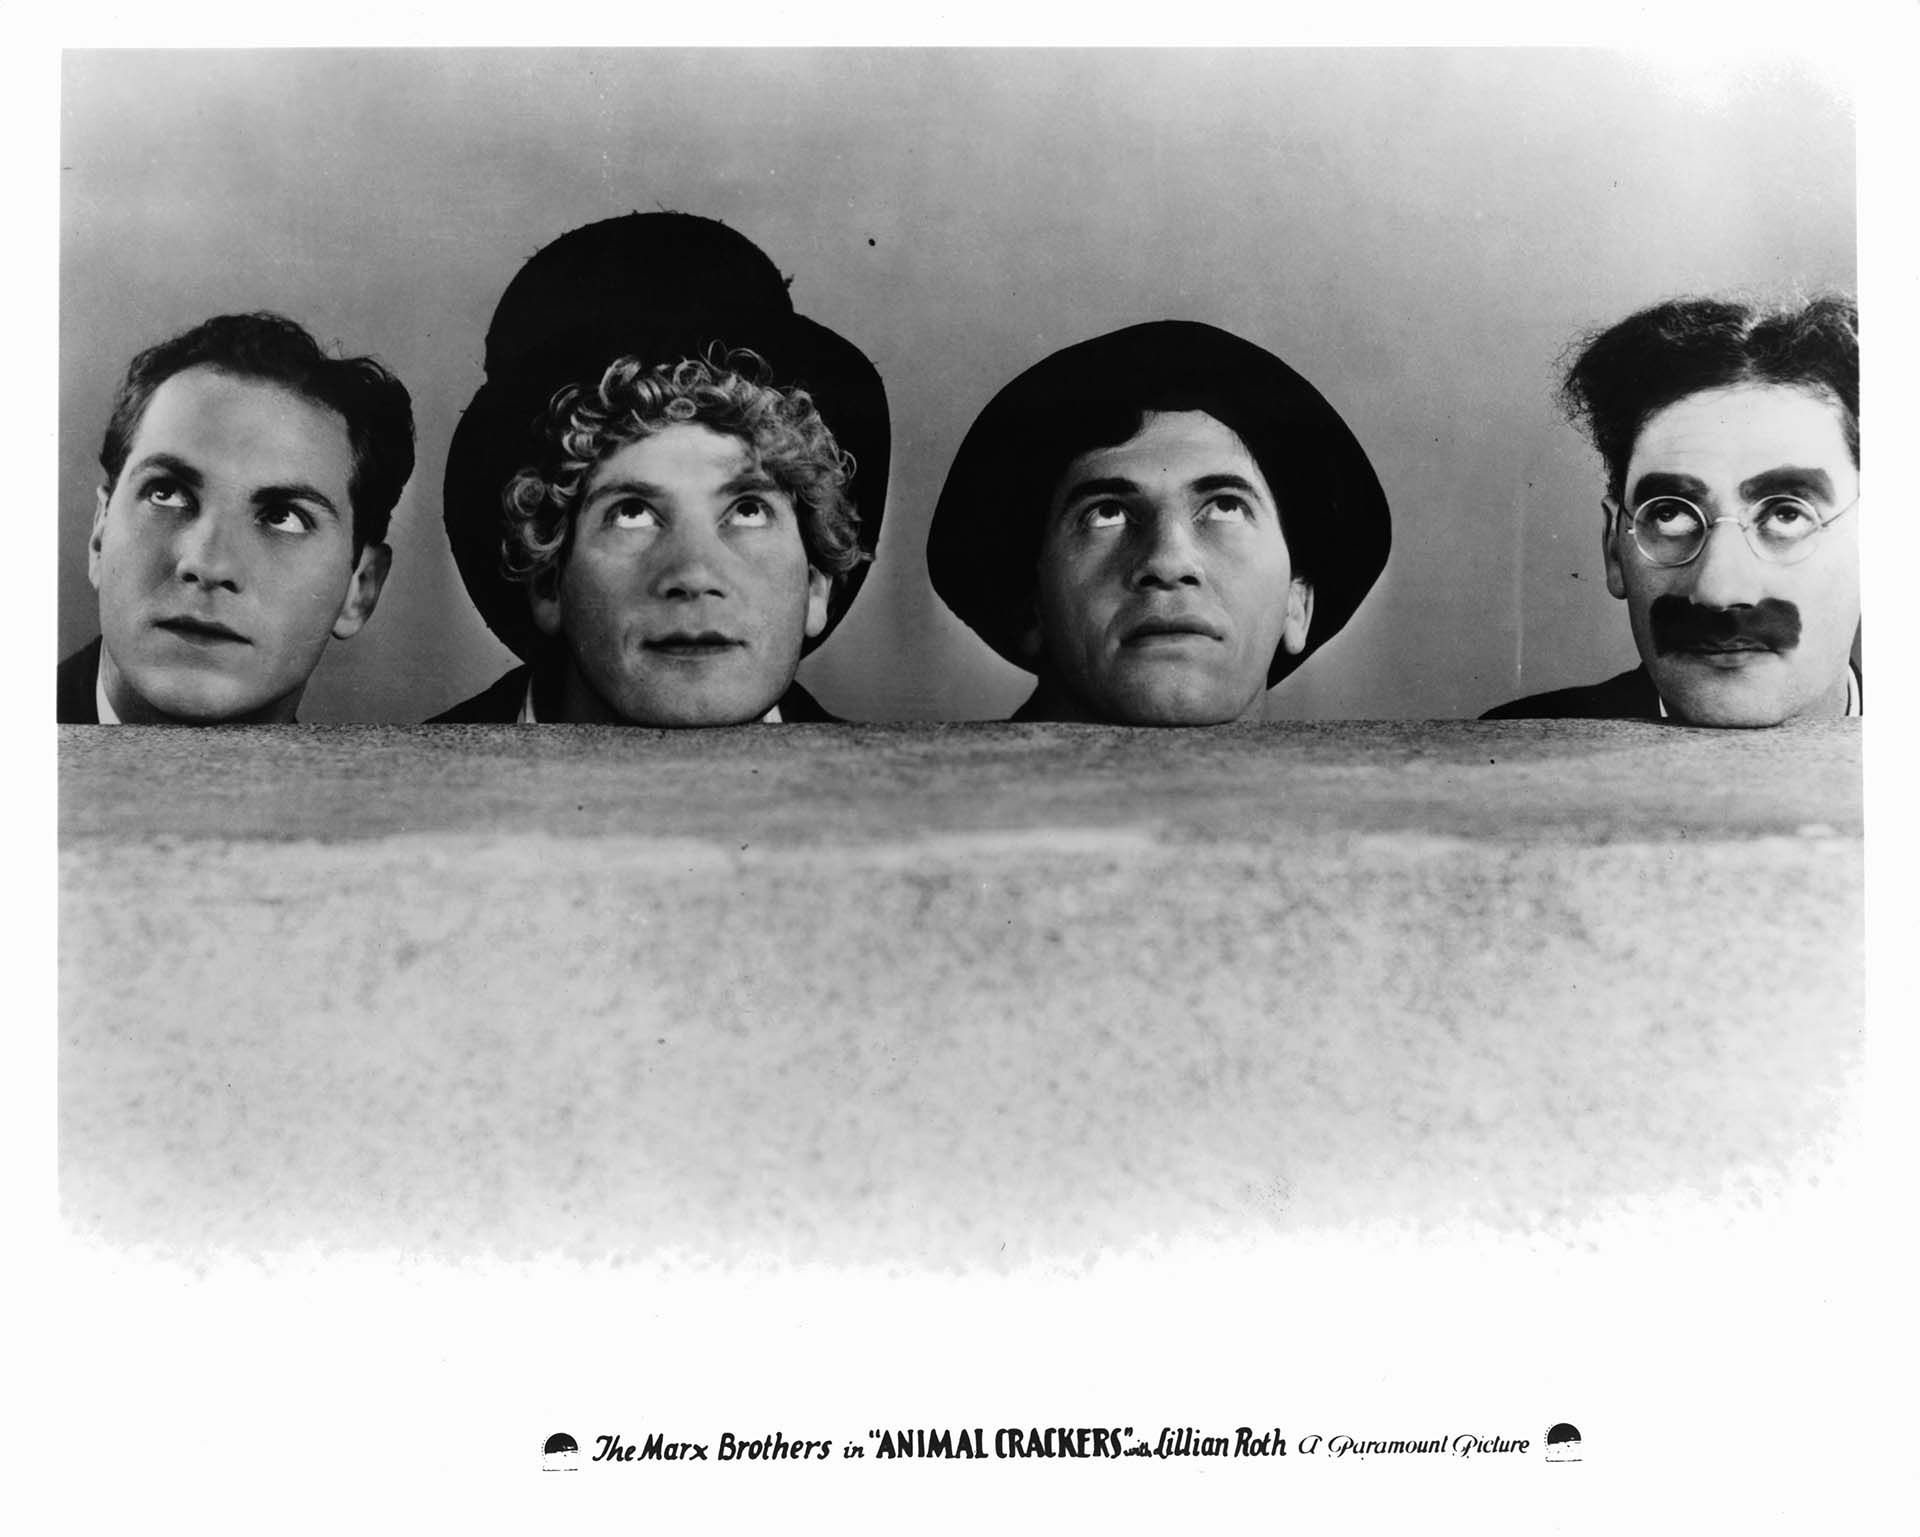 The Marx Brothers: Zeppo, Harpo, Chico and Groucho in a commercial for their film 'Animal Crackers', 1930 (Photo by Paramount/Getty Images)